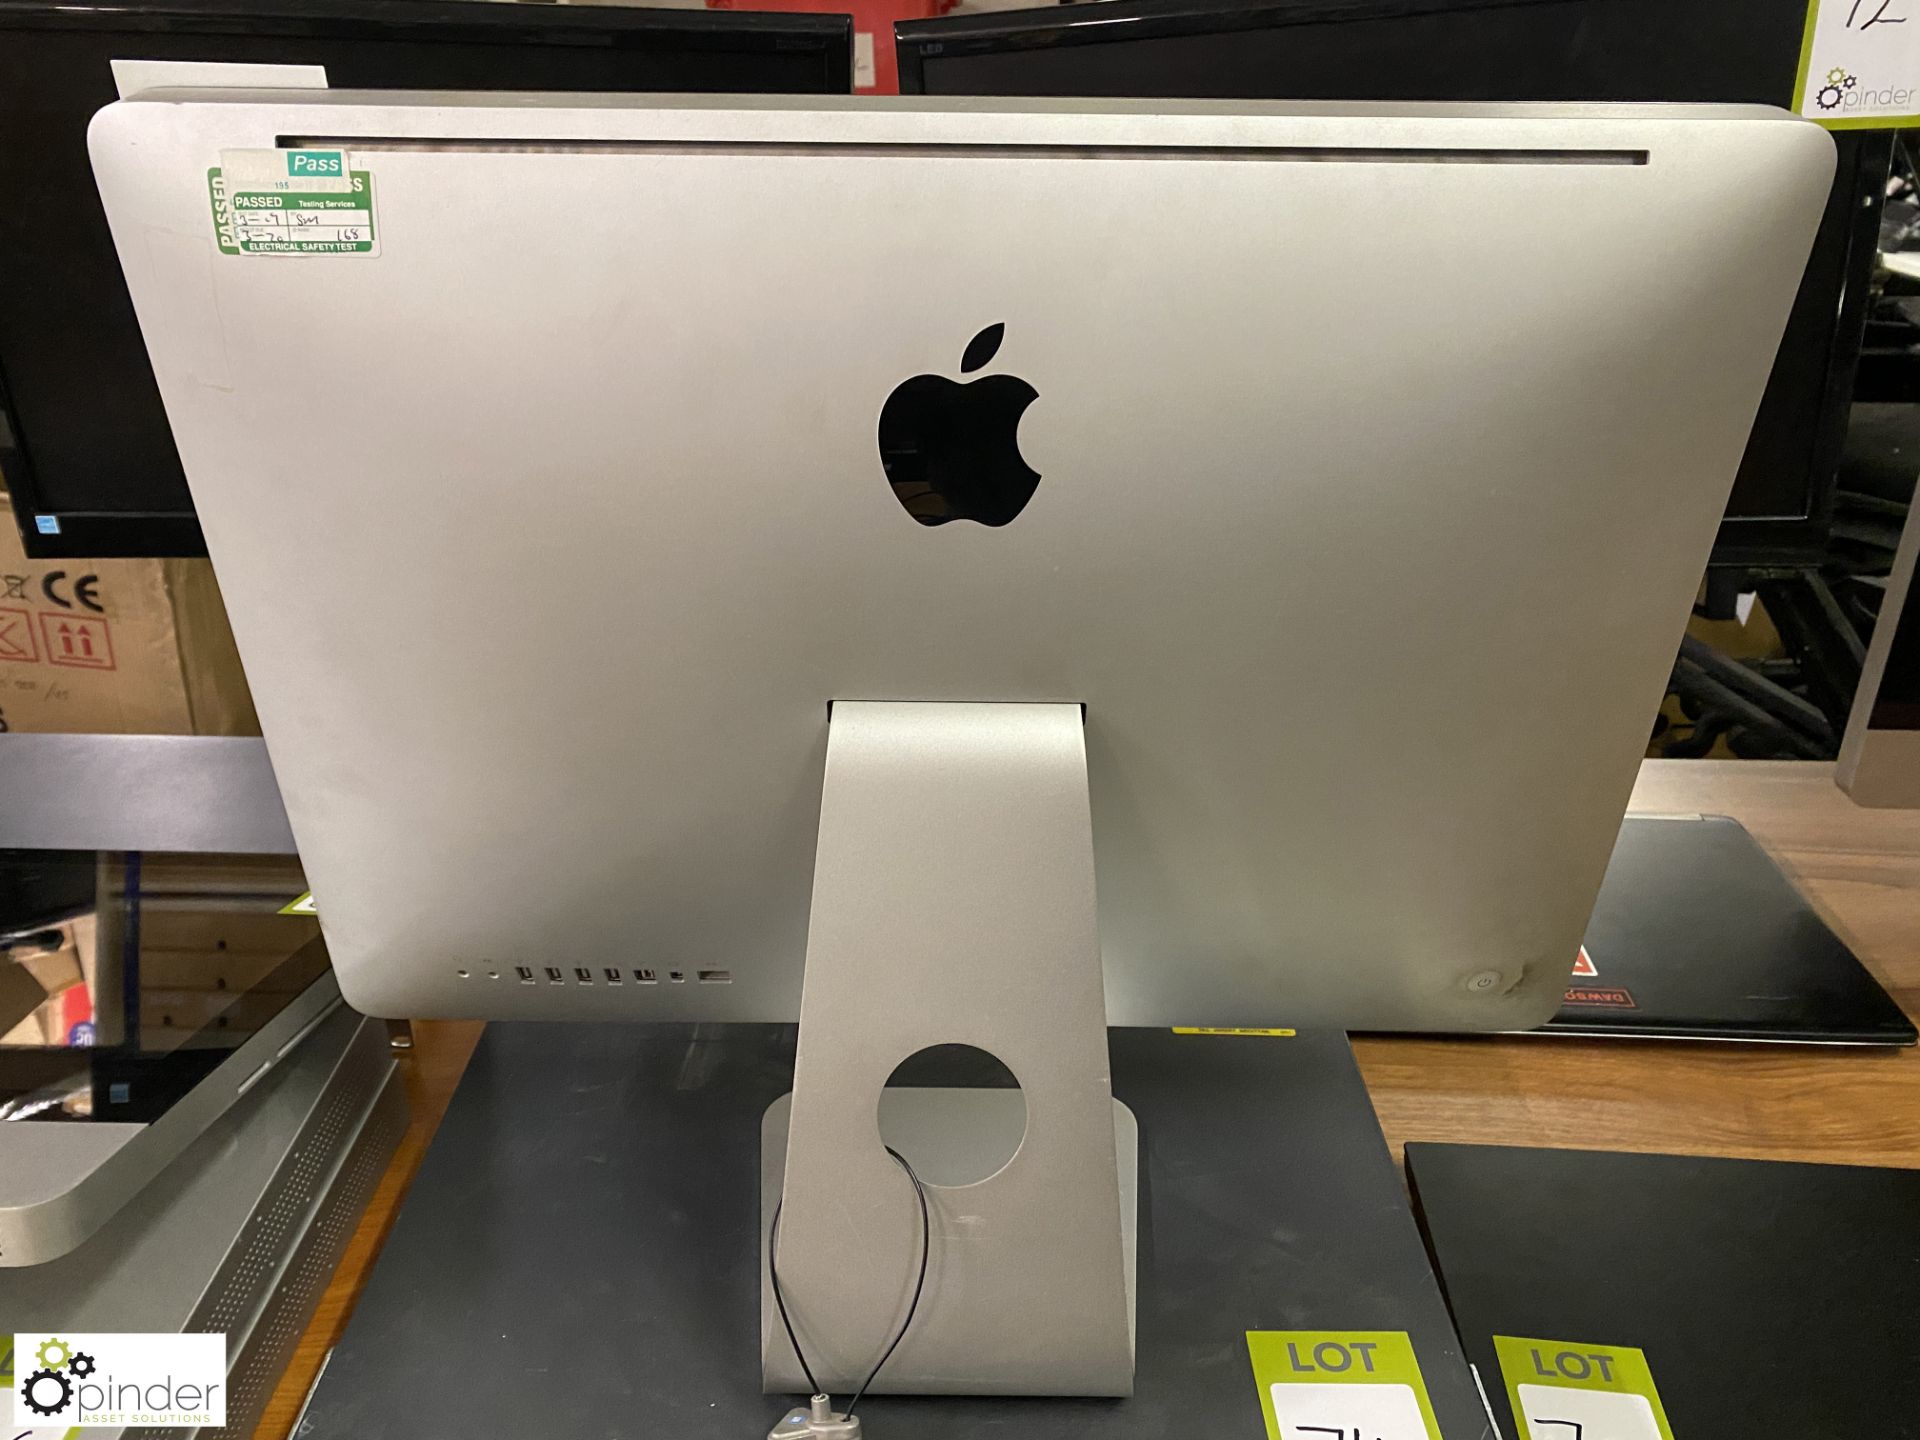 Apple iMAC A1311 Desktop PC, no keyboard, mouse, lead or passwords (no HDD) - Image 2 of 4